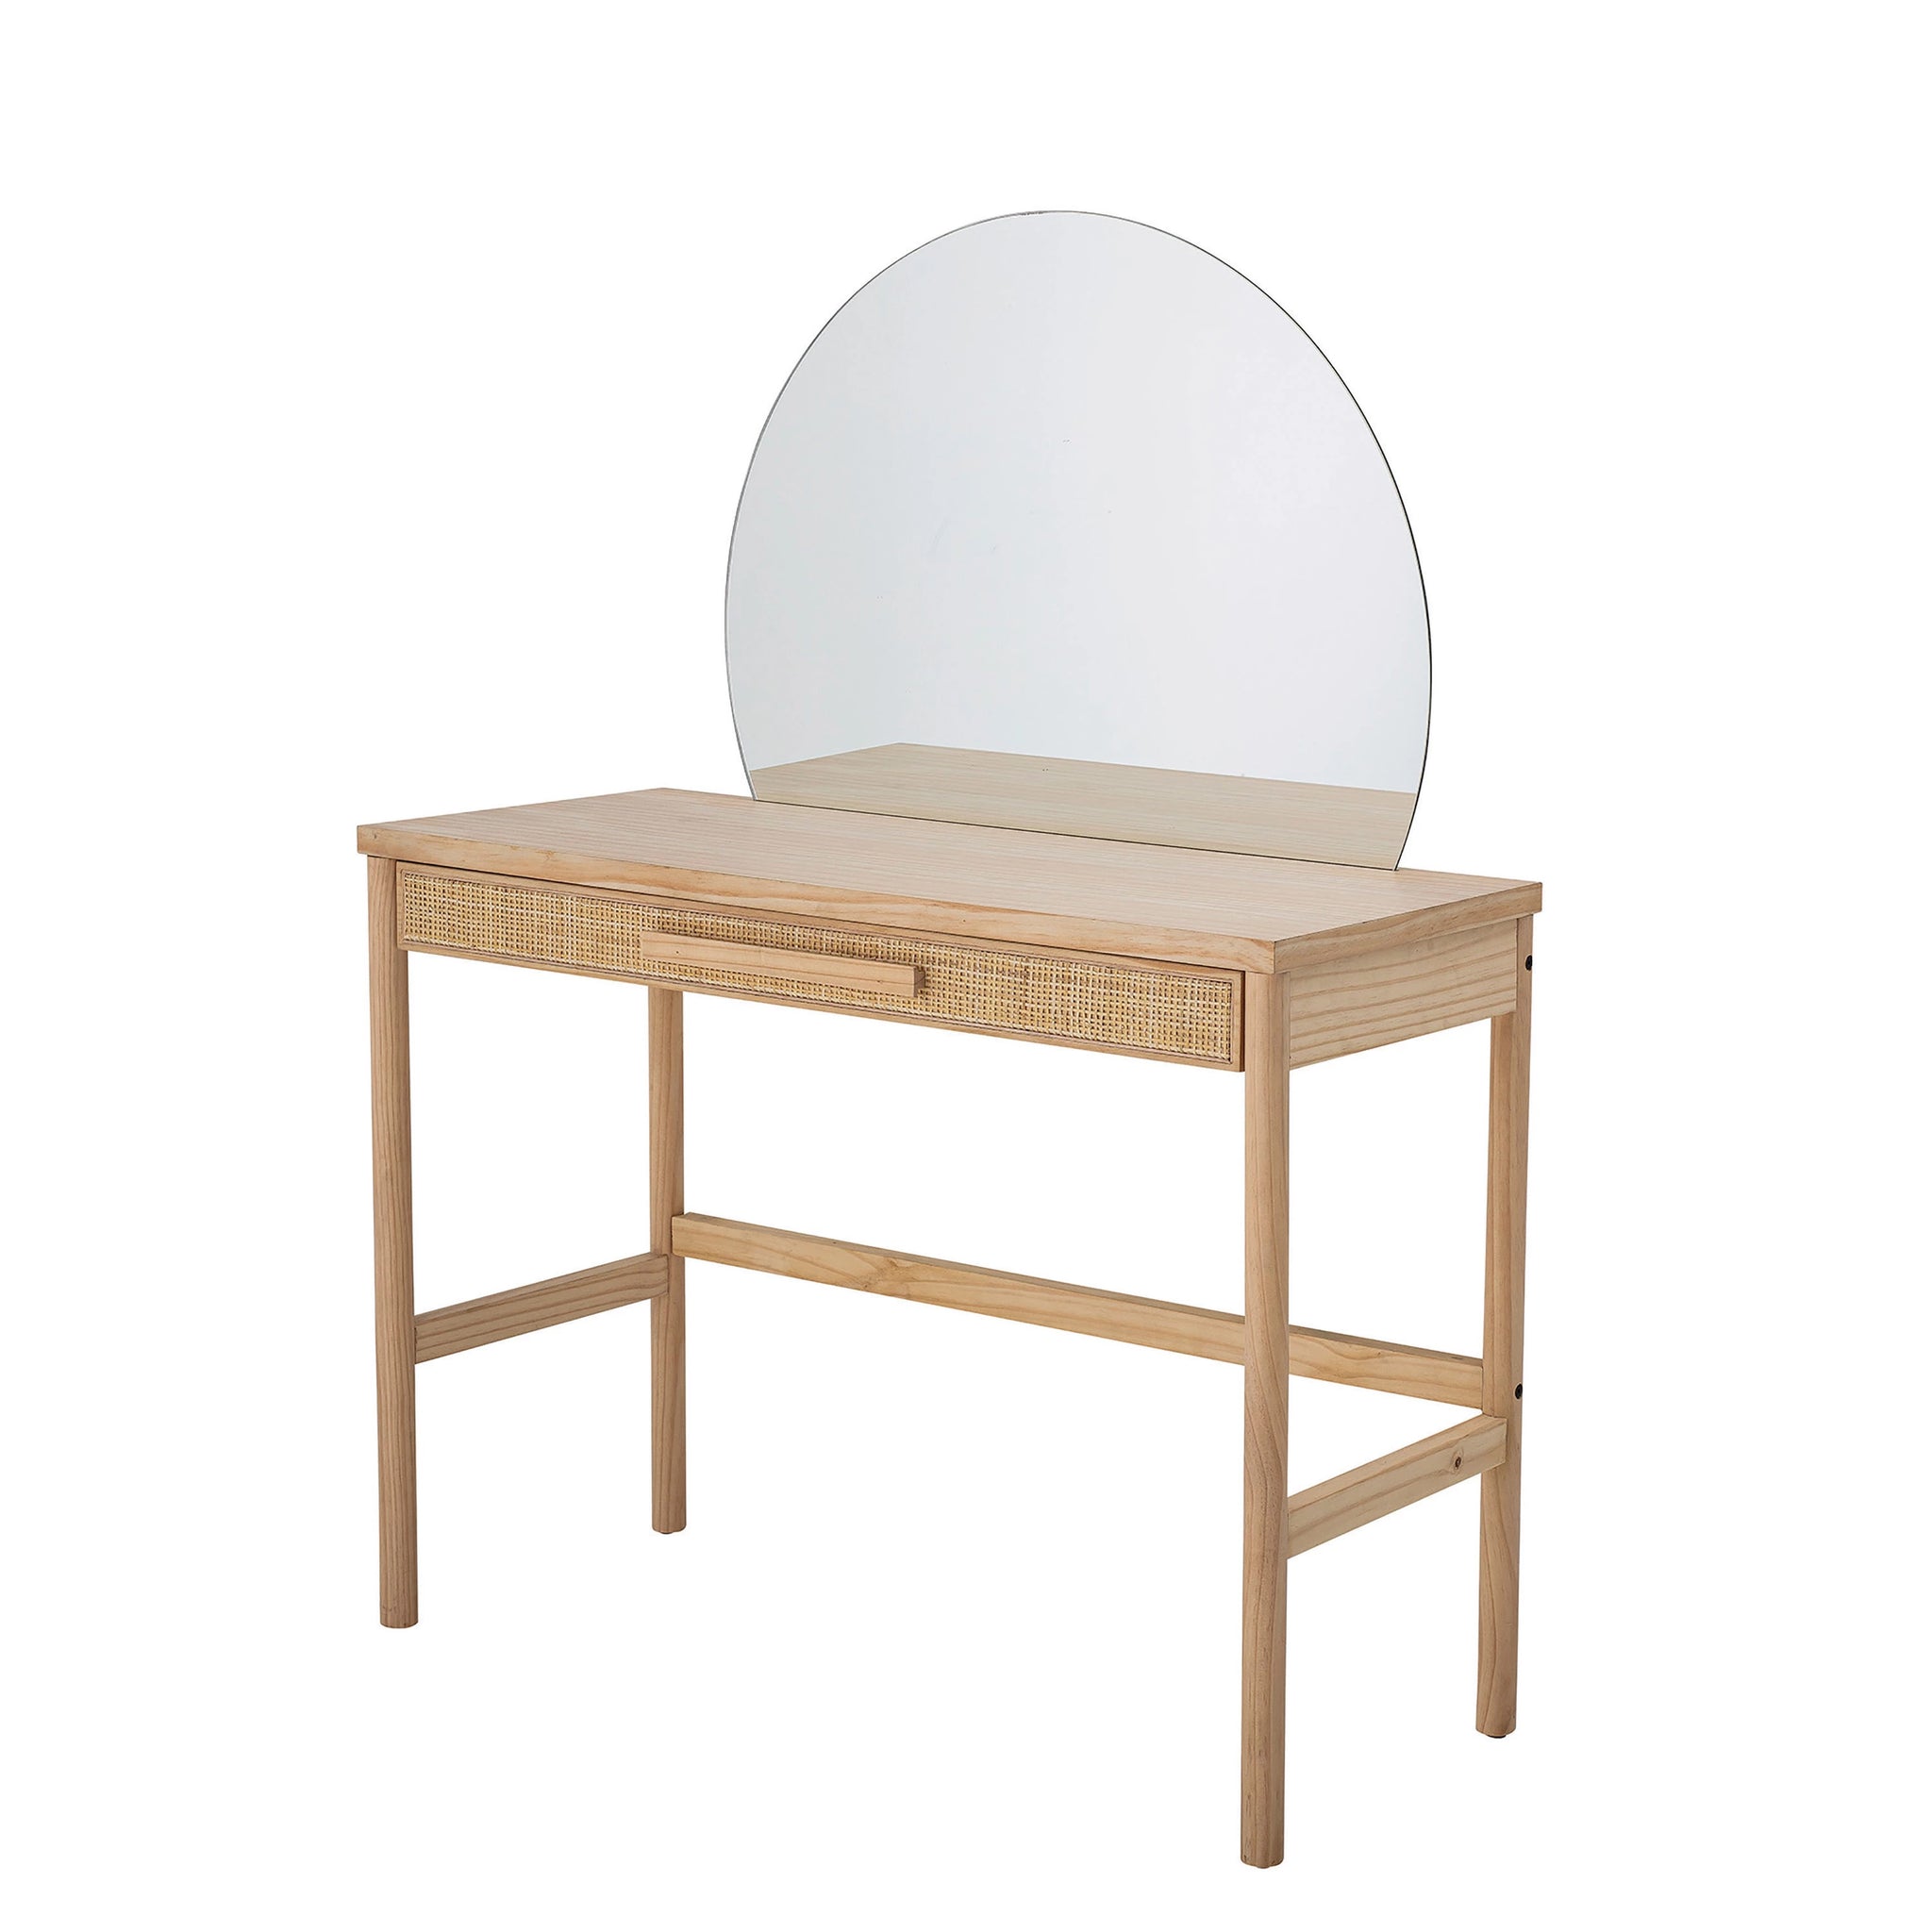 Malino Dressing Table – The Perfect Addition to Your Bedroom